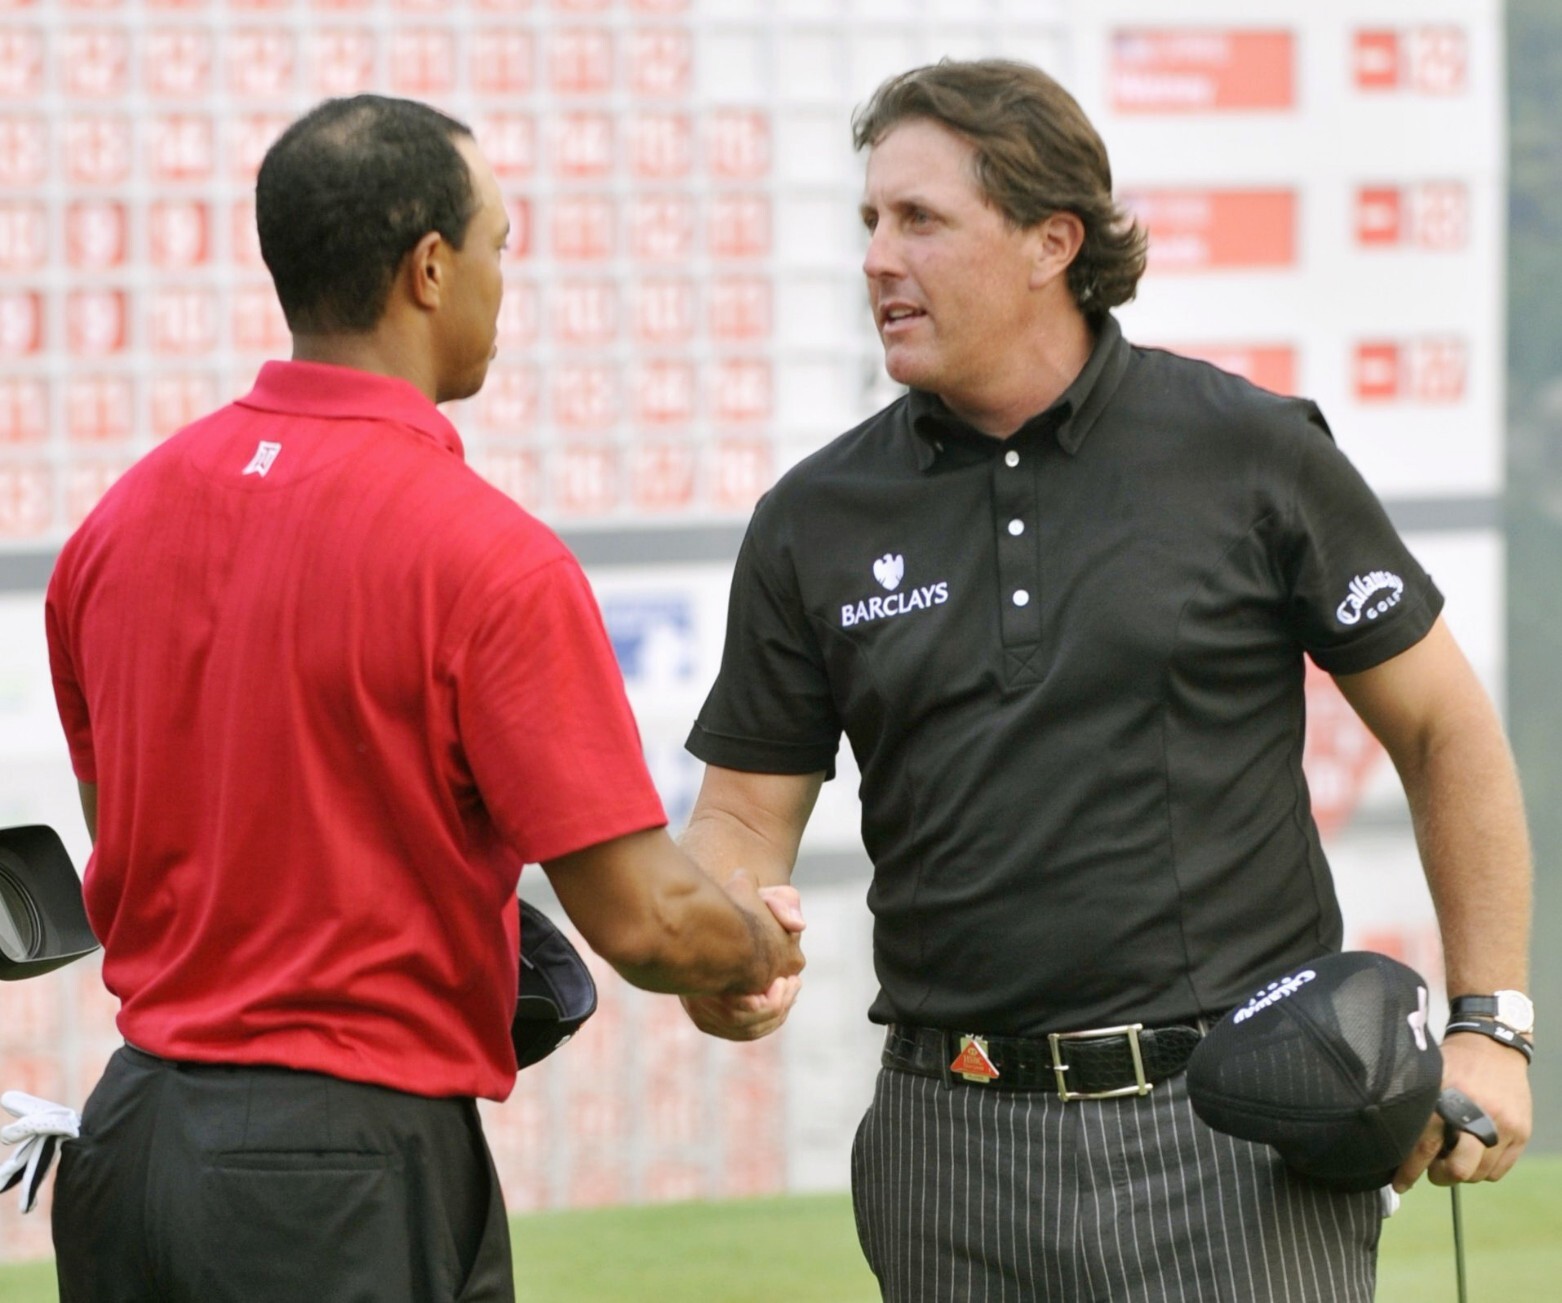 Phil Mickelson is congratulated by Tiger Woods after winning the WGC-HSBC Champions in Shanghai in 2009. The 2020 event has been cancelled due to the coronavirus. Photo: Kyodo